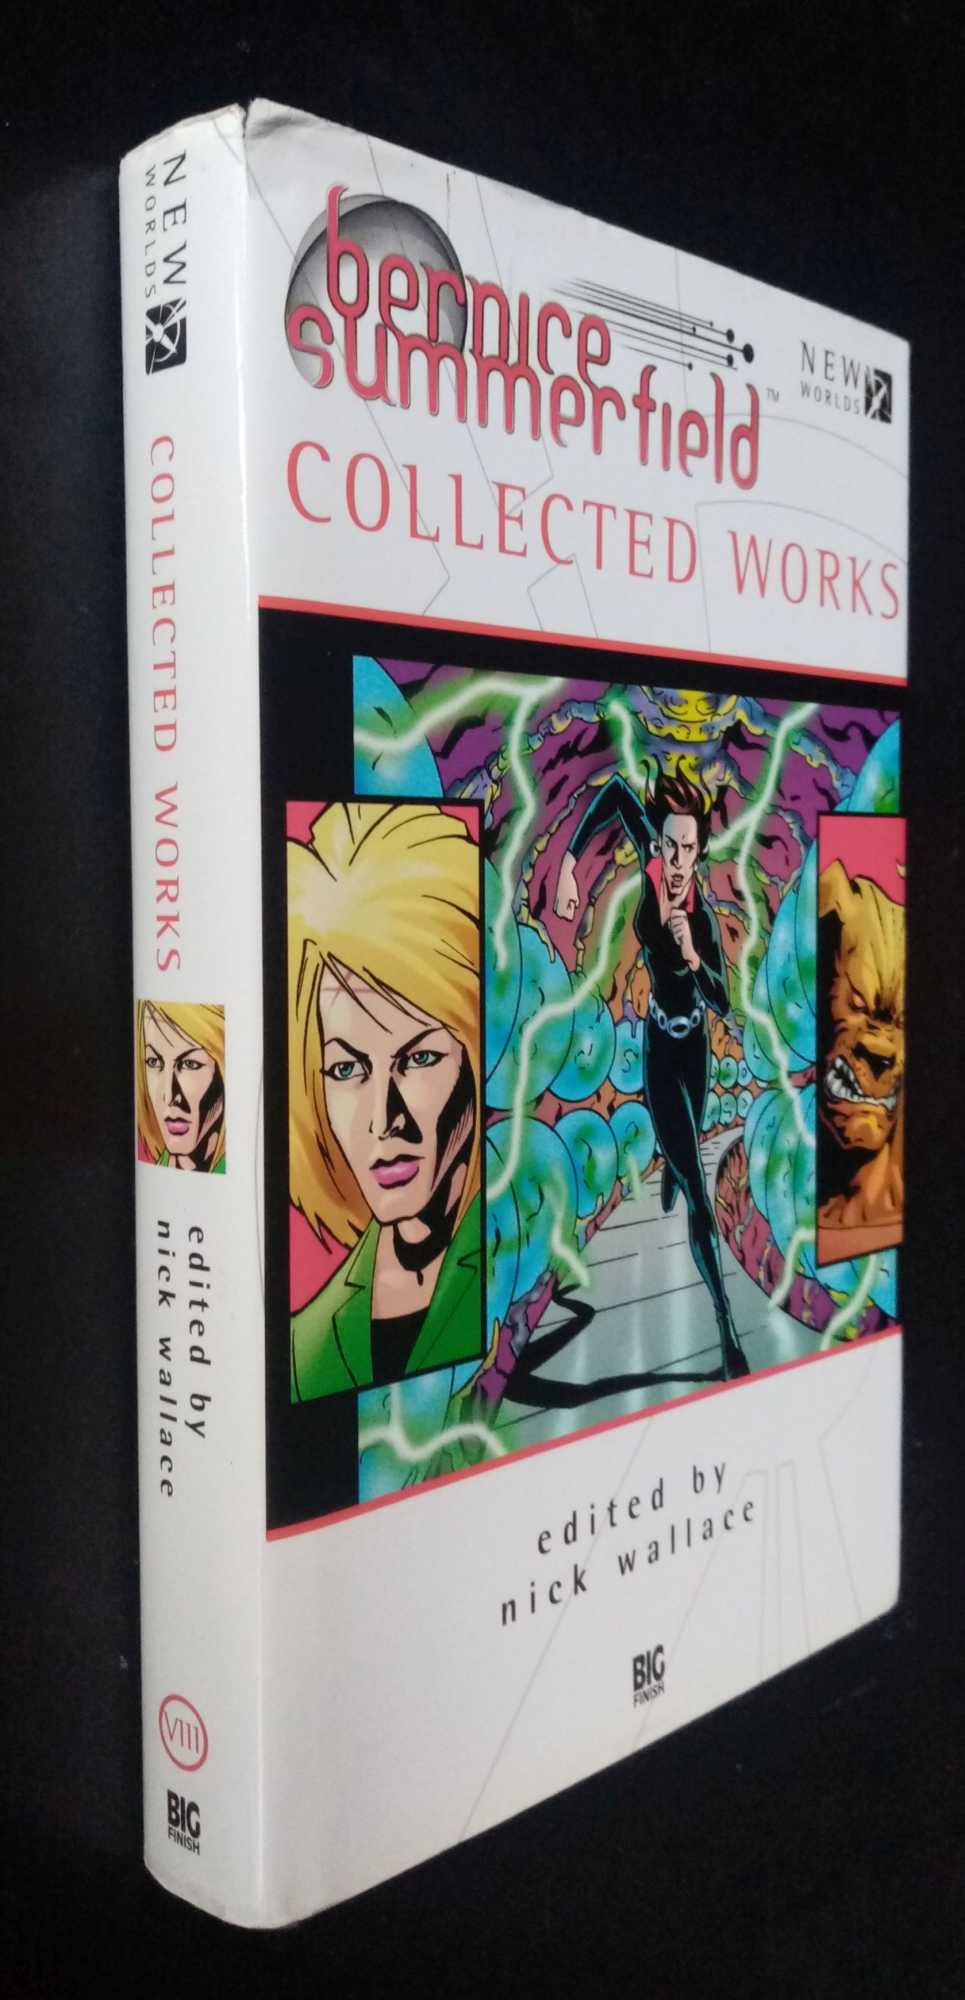 Nick Wallace, ed. - Bernice Summerfield - Collected Works